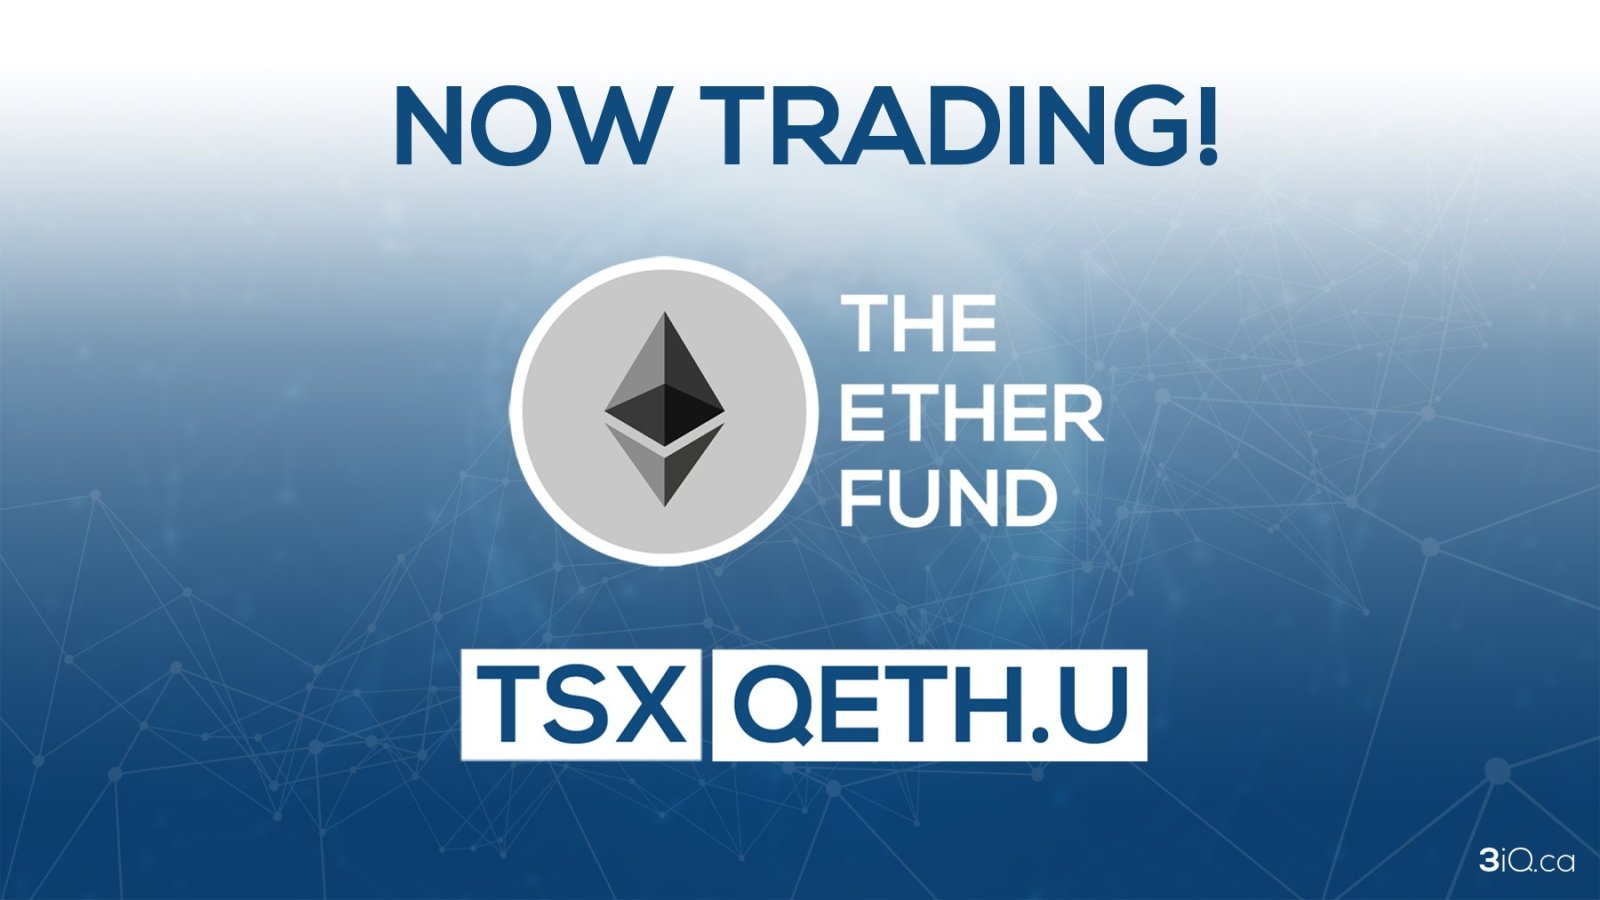 3iQ has its Ethereum fund listed by TSX